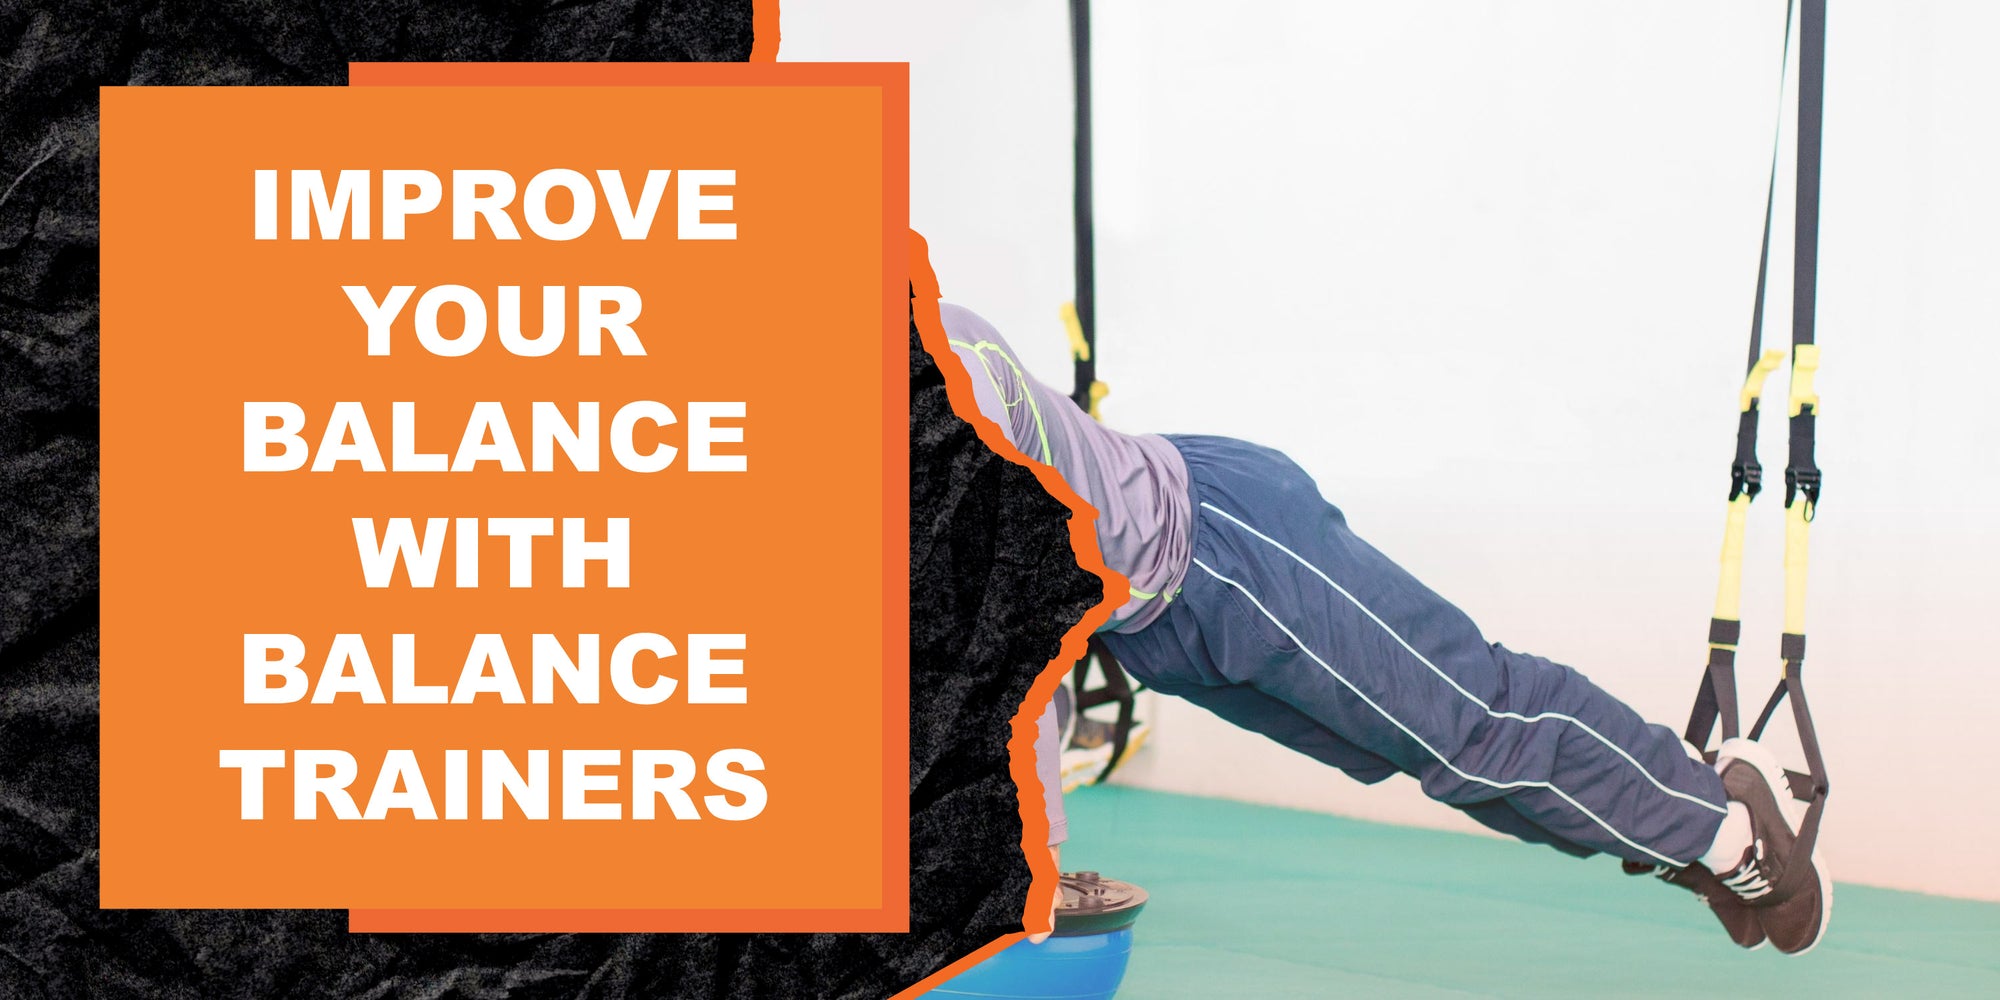 Improve Your Balance With Balance Trainers